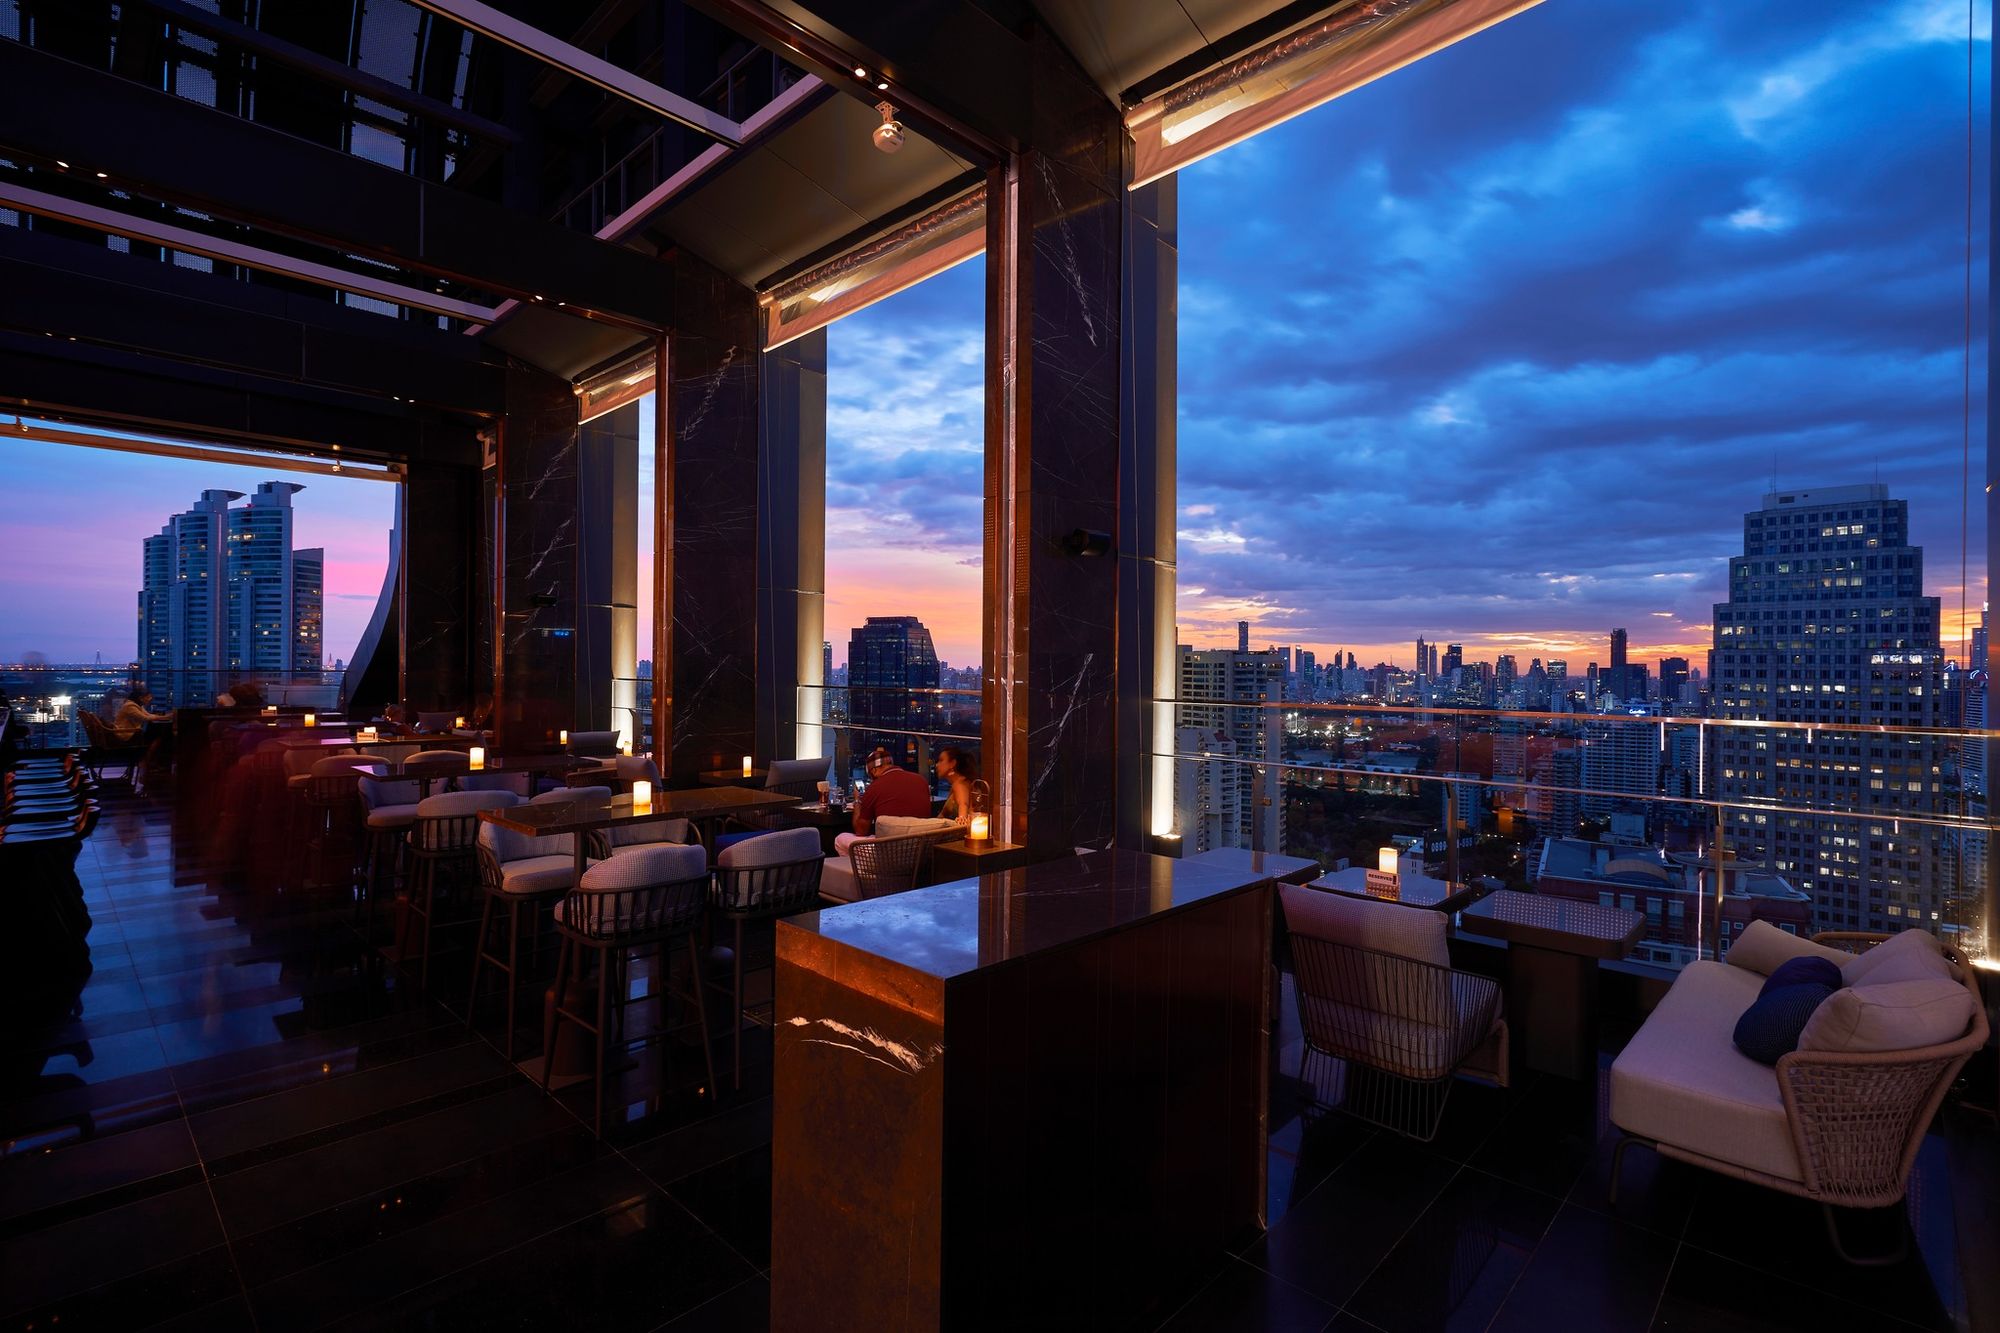 The Cooling Tower Rooftop Bar provides an ideal setting for sunset drinks.